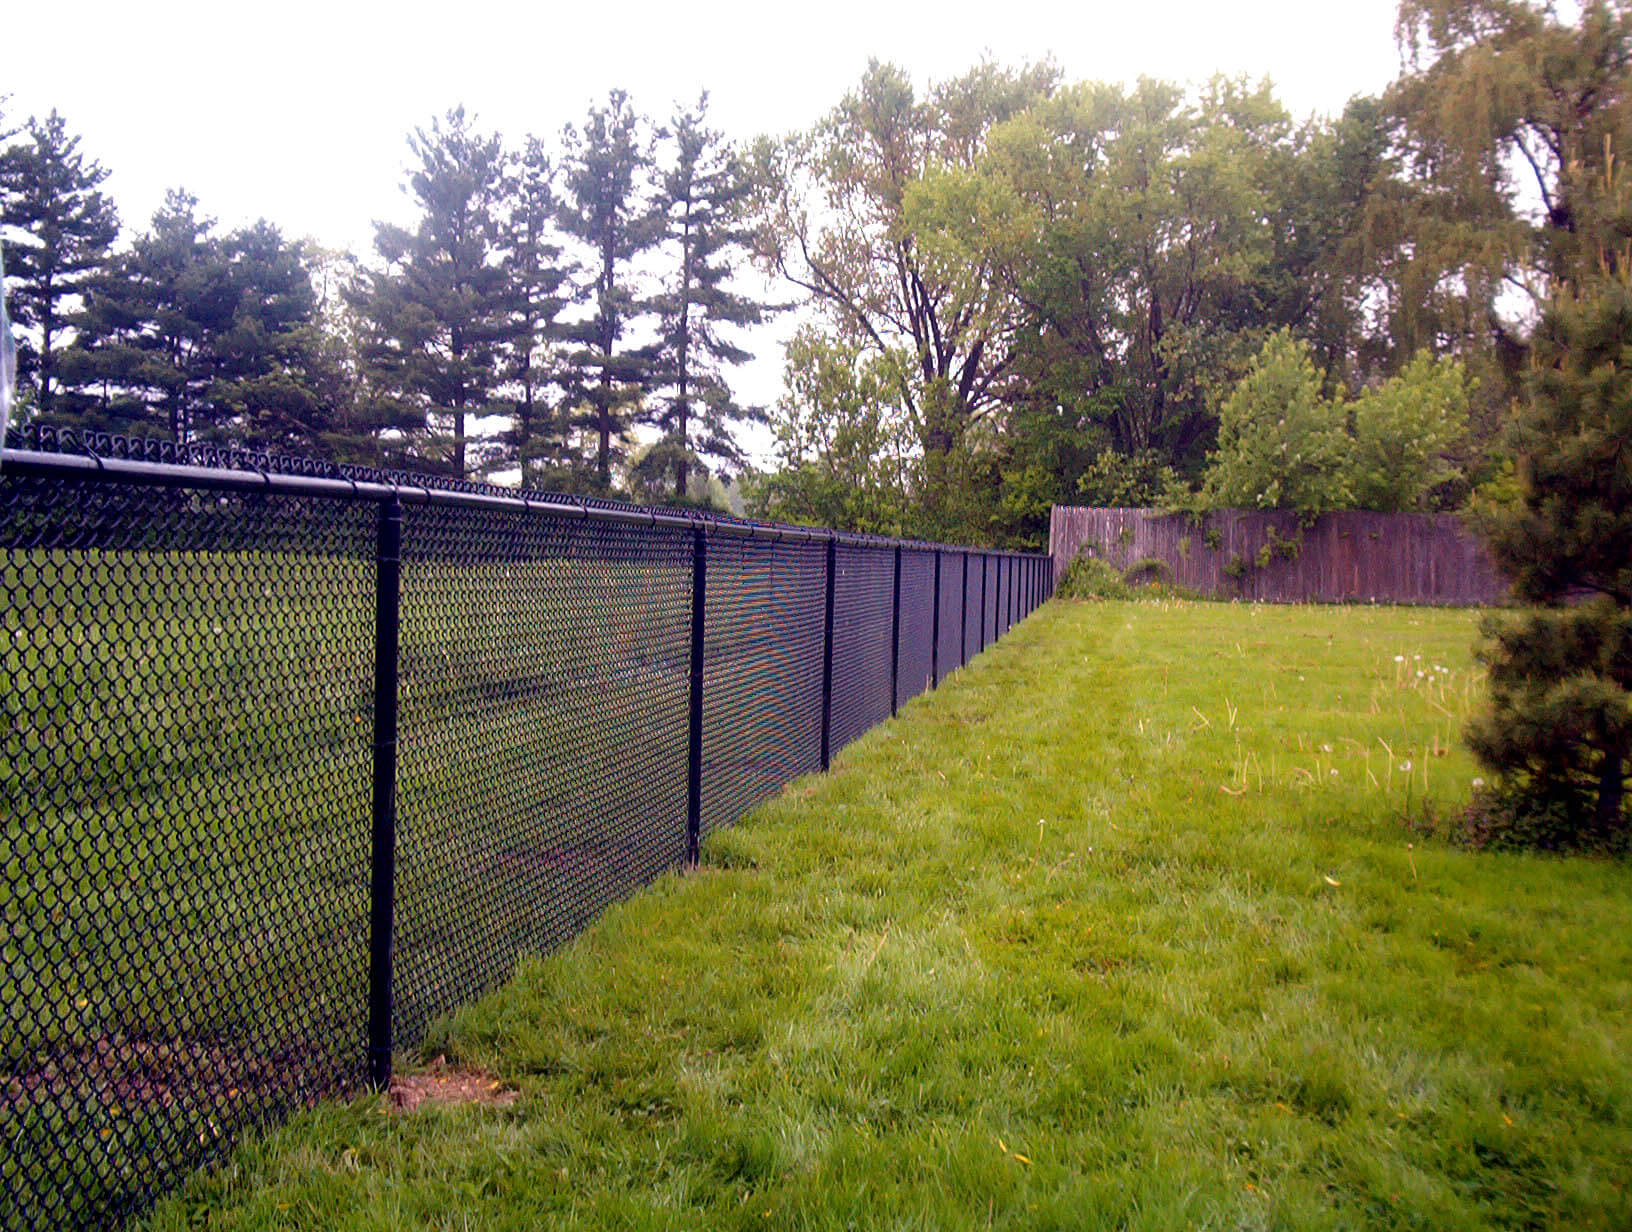 Sports Field Fences: Safeguarding Athletes and Spectators